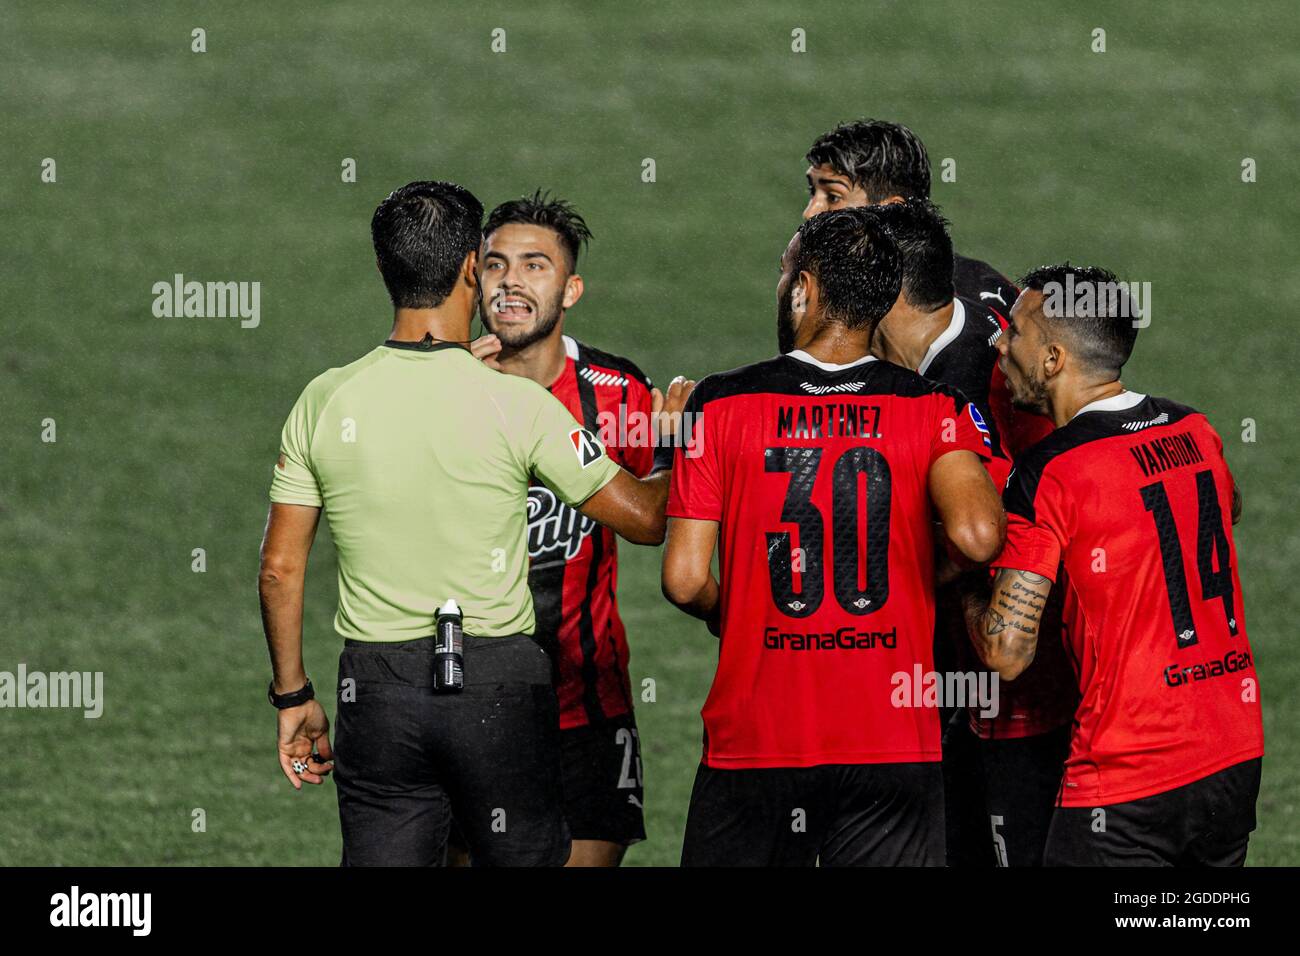 Santos, Brazil. 12th Aug, 2021. Referee Leodan Gonzalez in the match between Santos X Libertad valid for the quarter finals of the Copa Sudamericana 2021. The match takes place this Thursday night, August 12th. Credit: Van Campos/FotoArena/Alamy Live News Stock Photo